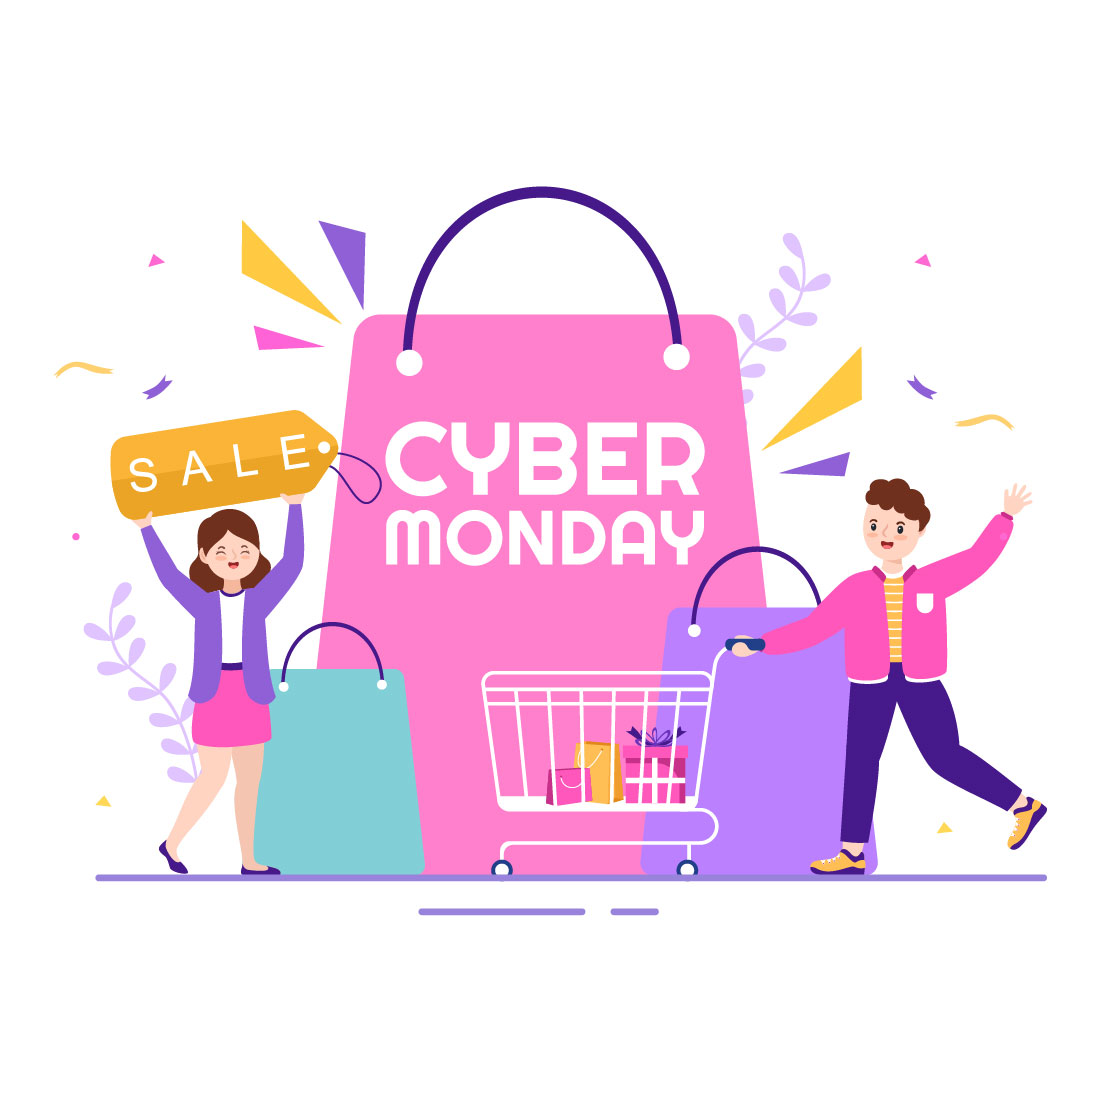 17 Cyber Monday Illustration cover image.